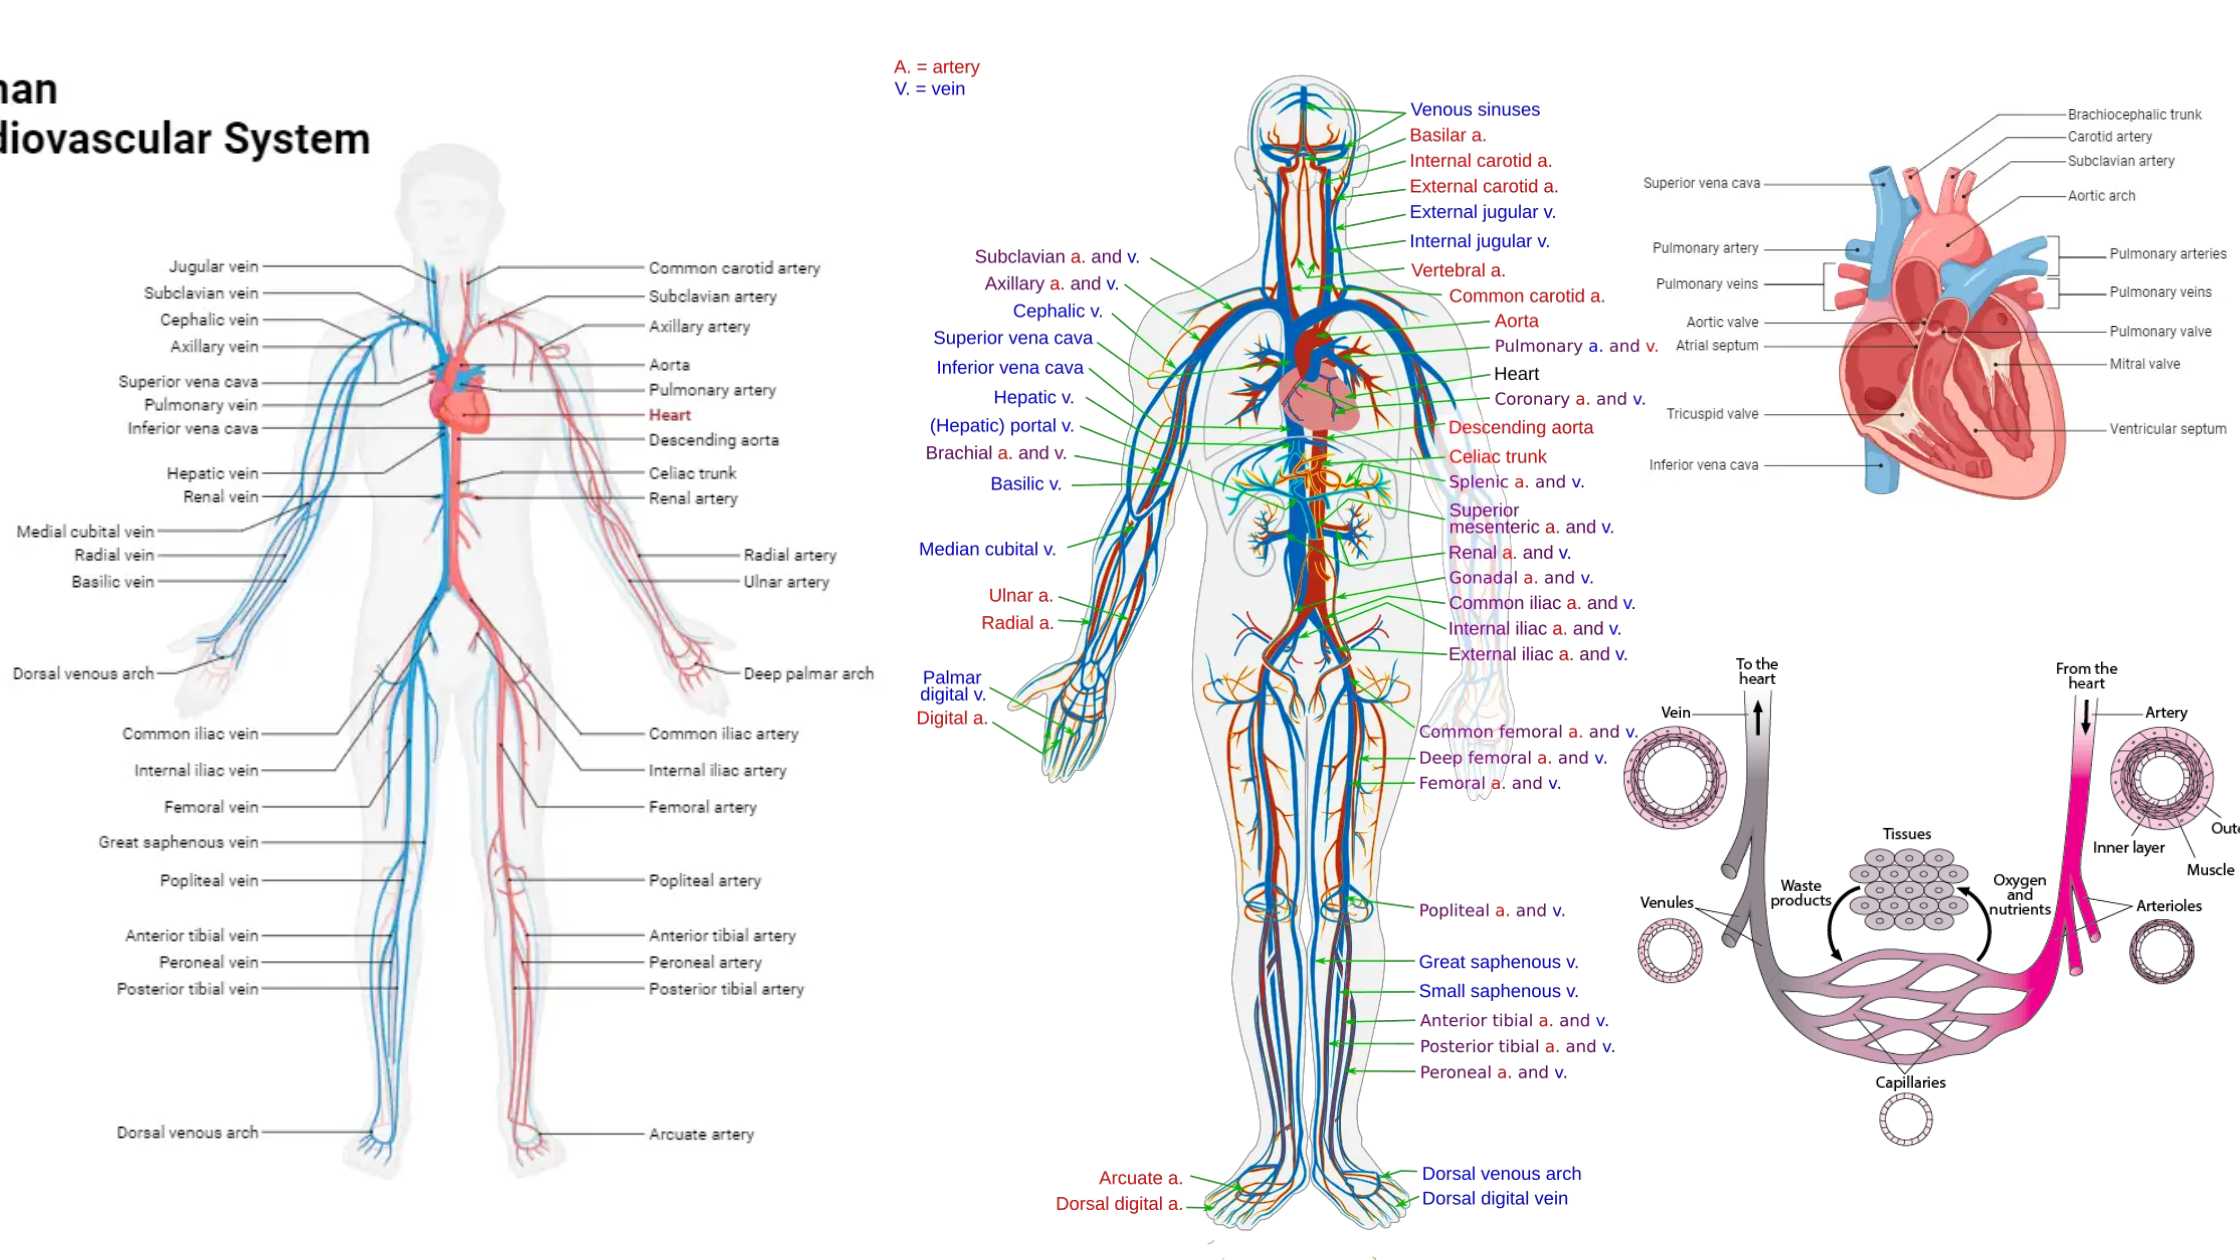 Human Circulatory System - Definition, Structure, Organs, Functions